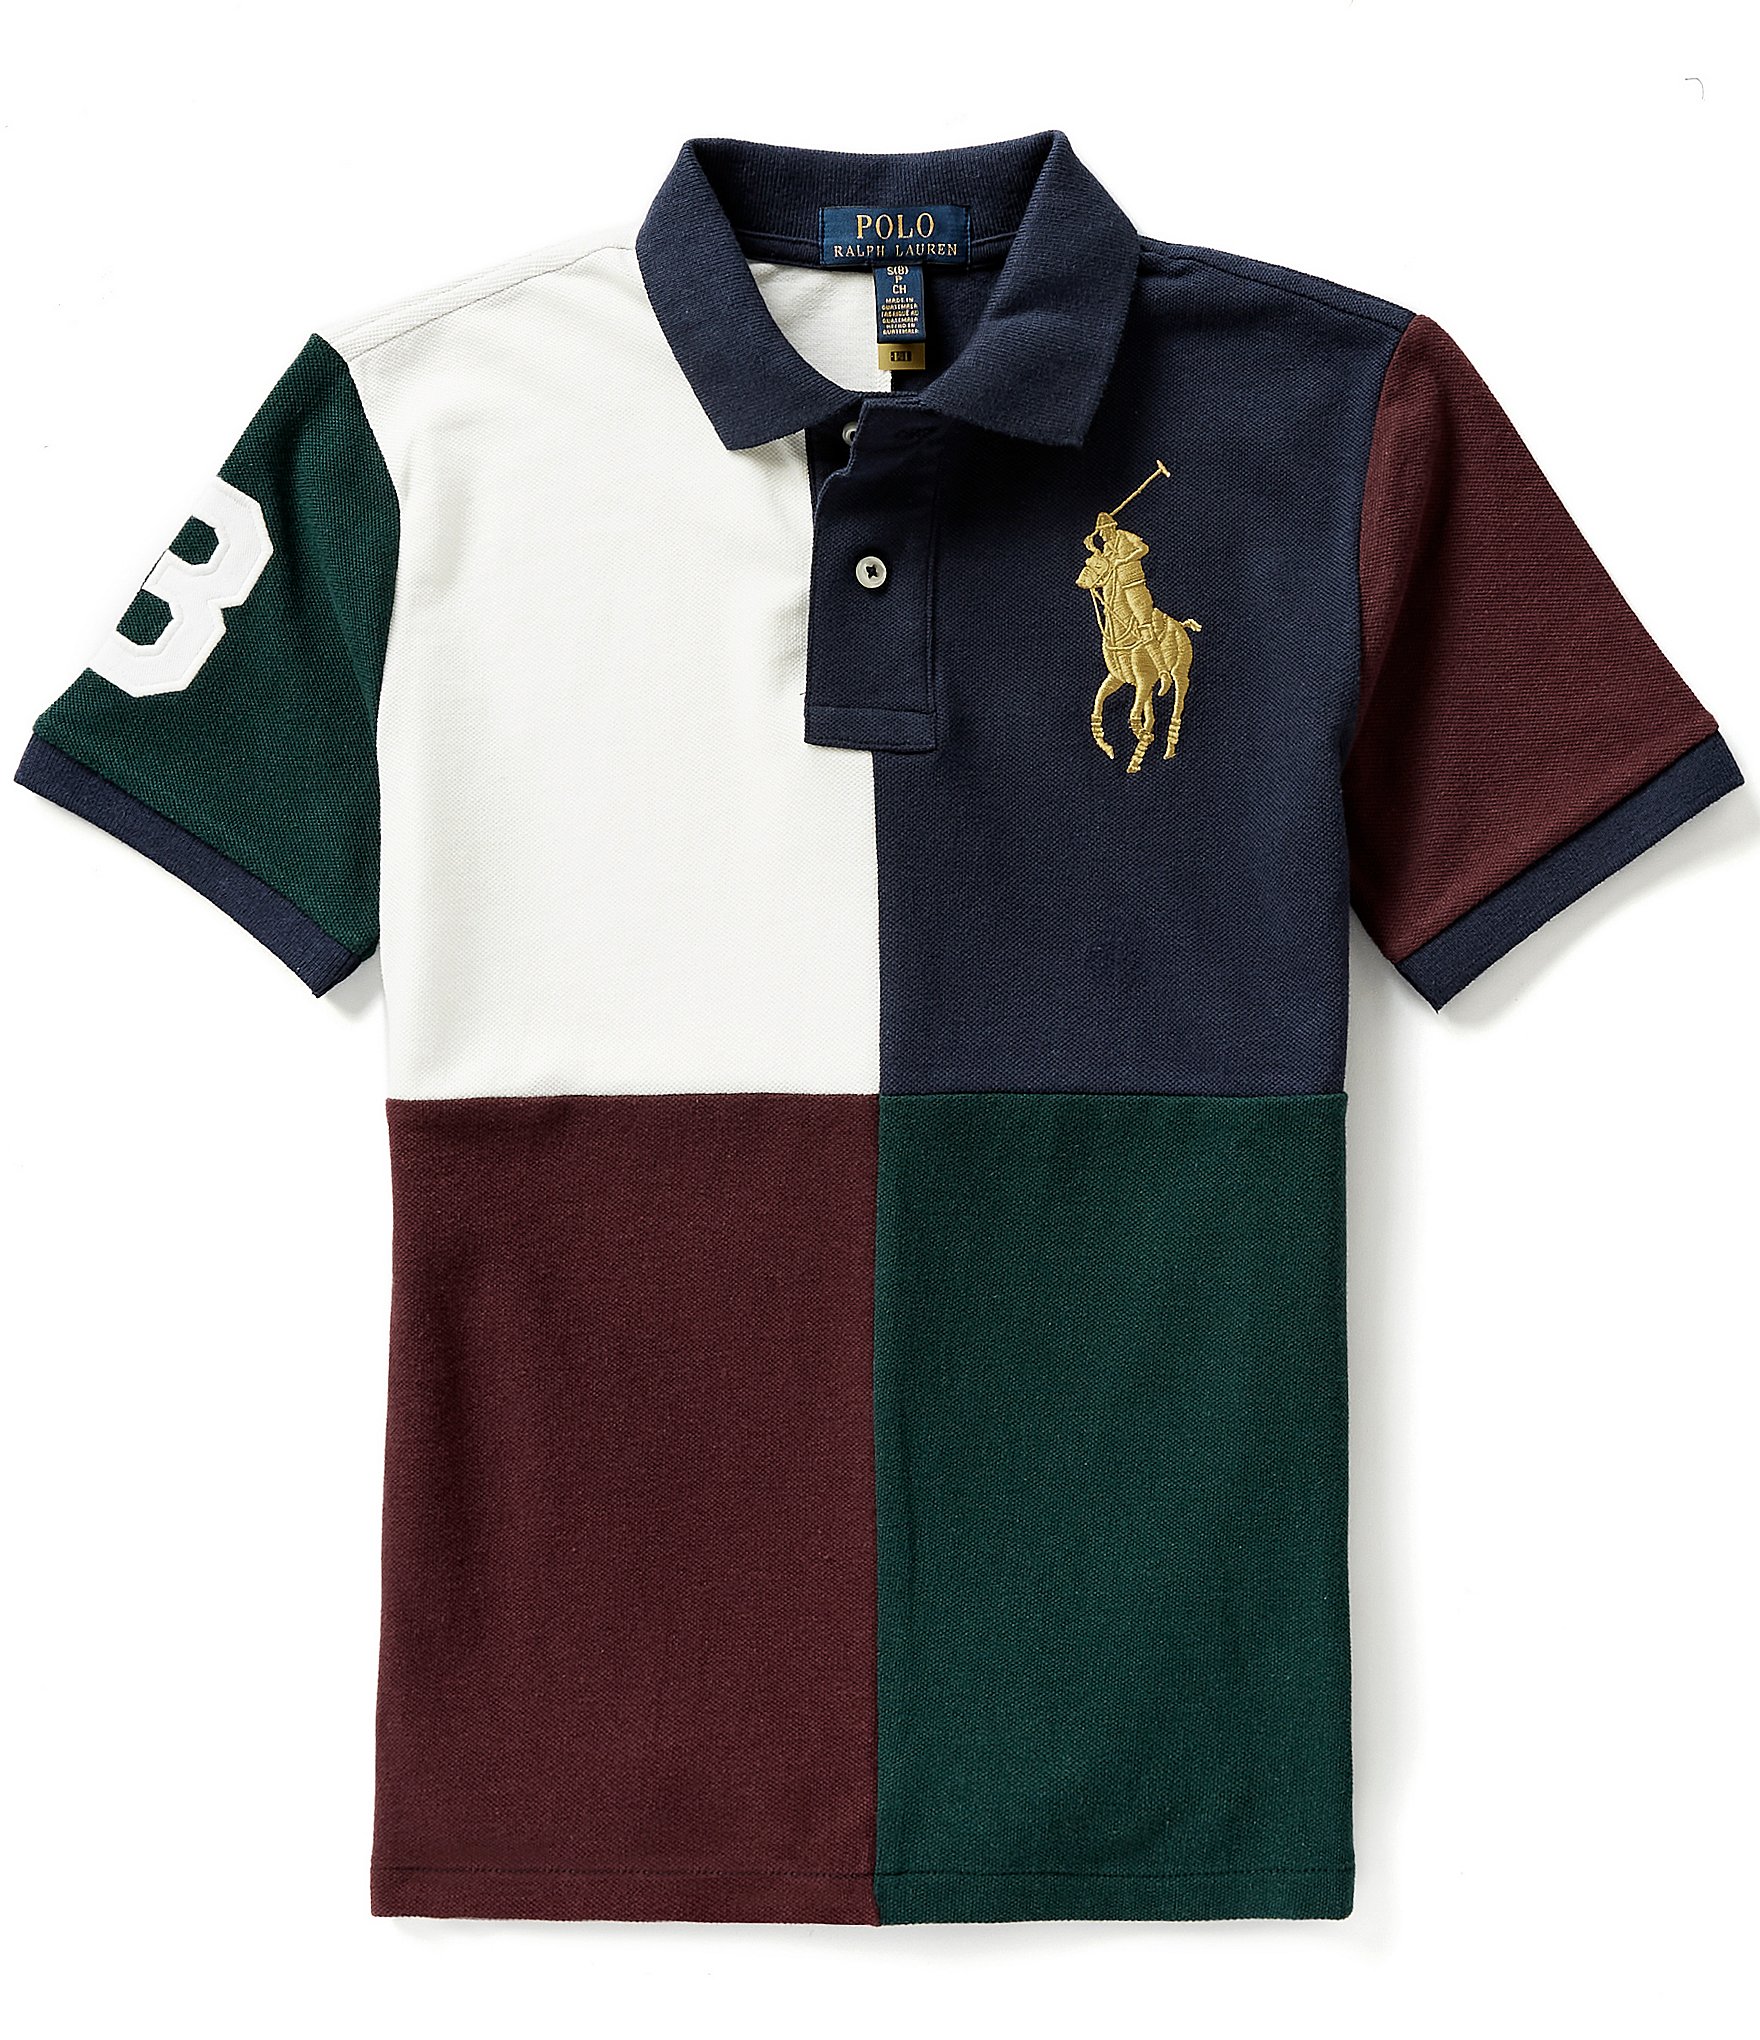 online shop & high quality 4 3XB Ralph Lauren Polo Big Pony and Rugby big  pony